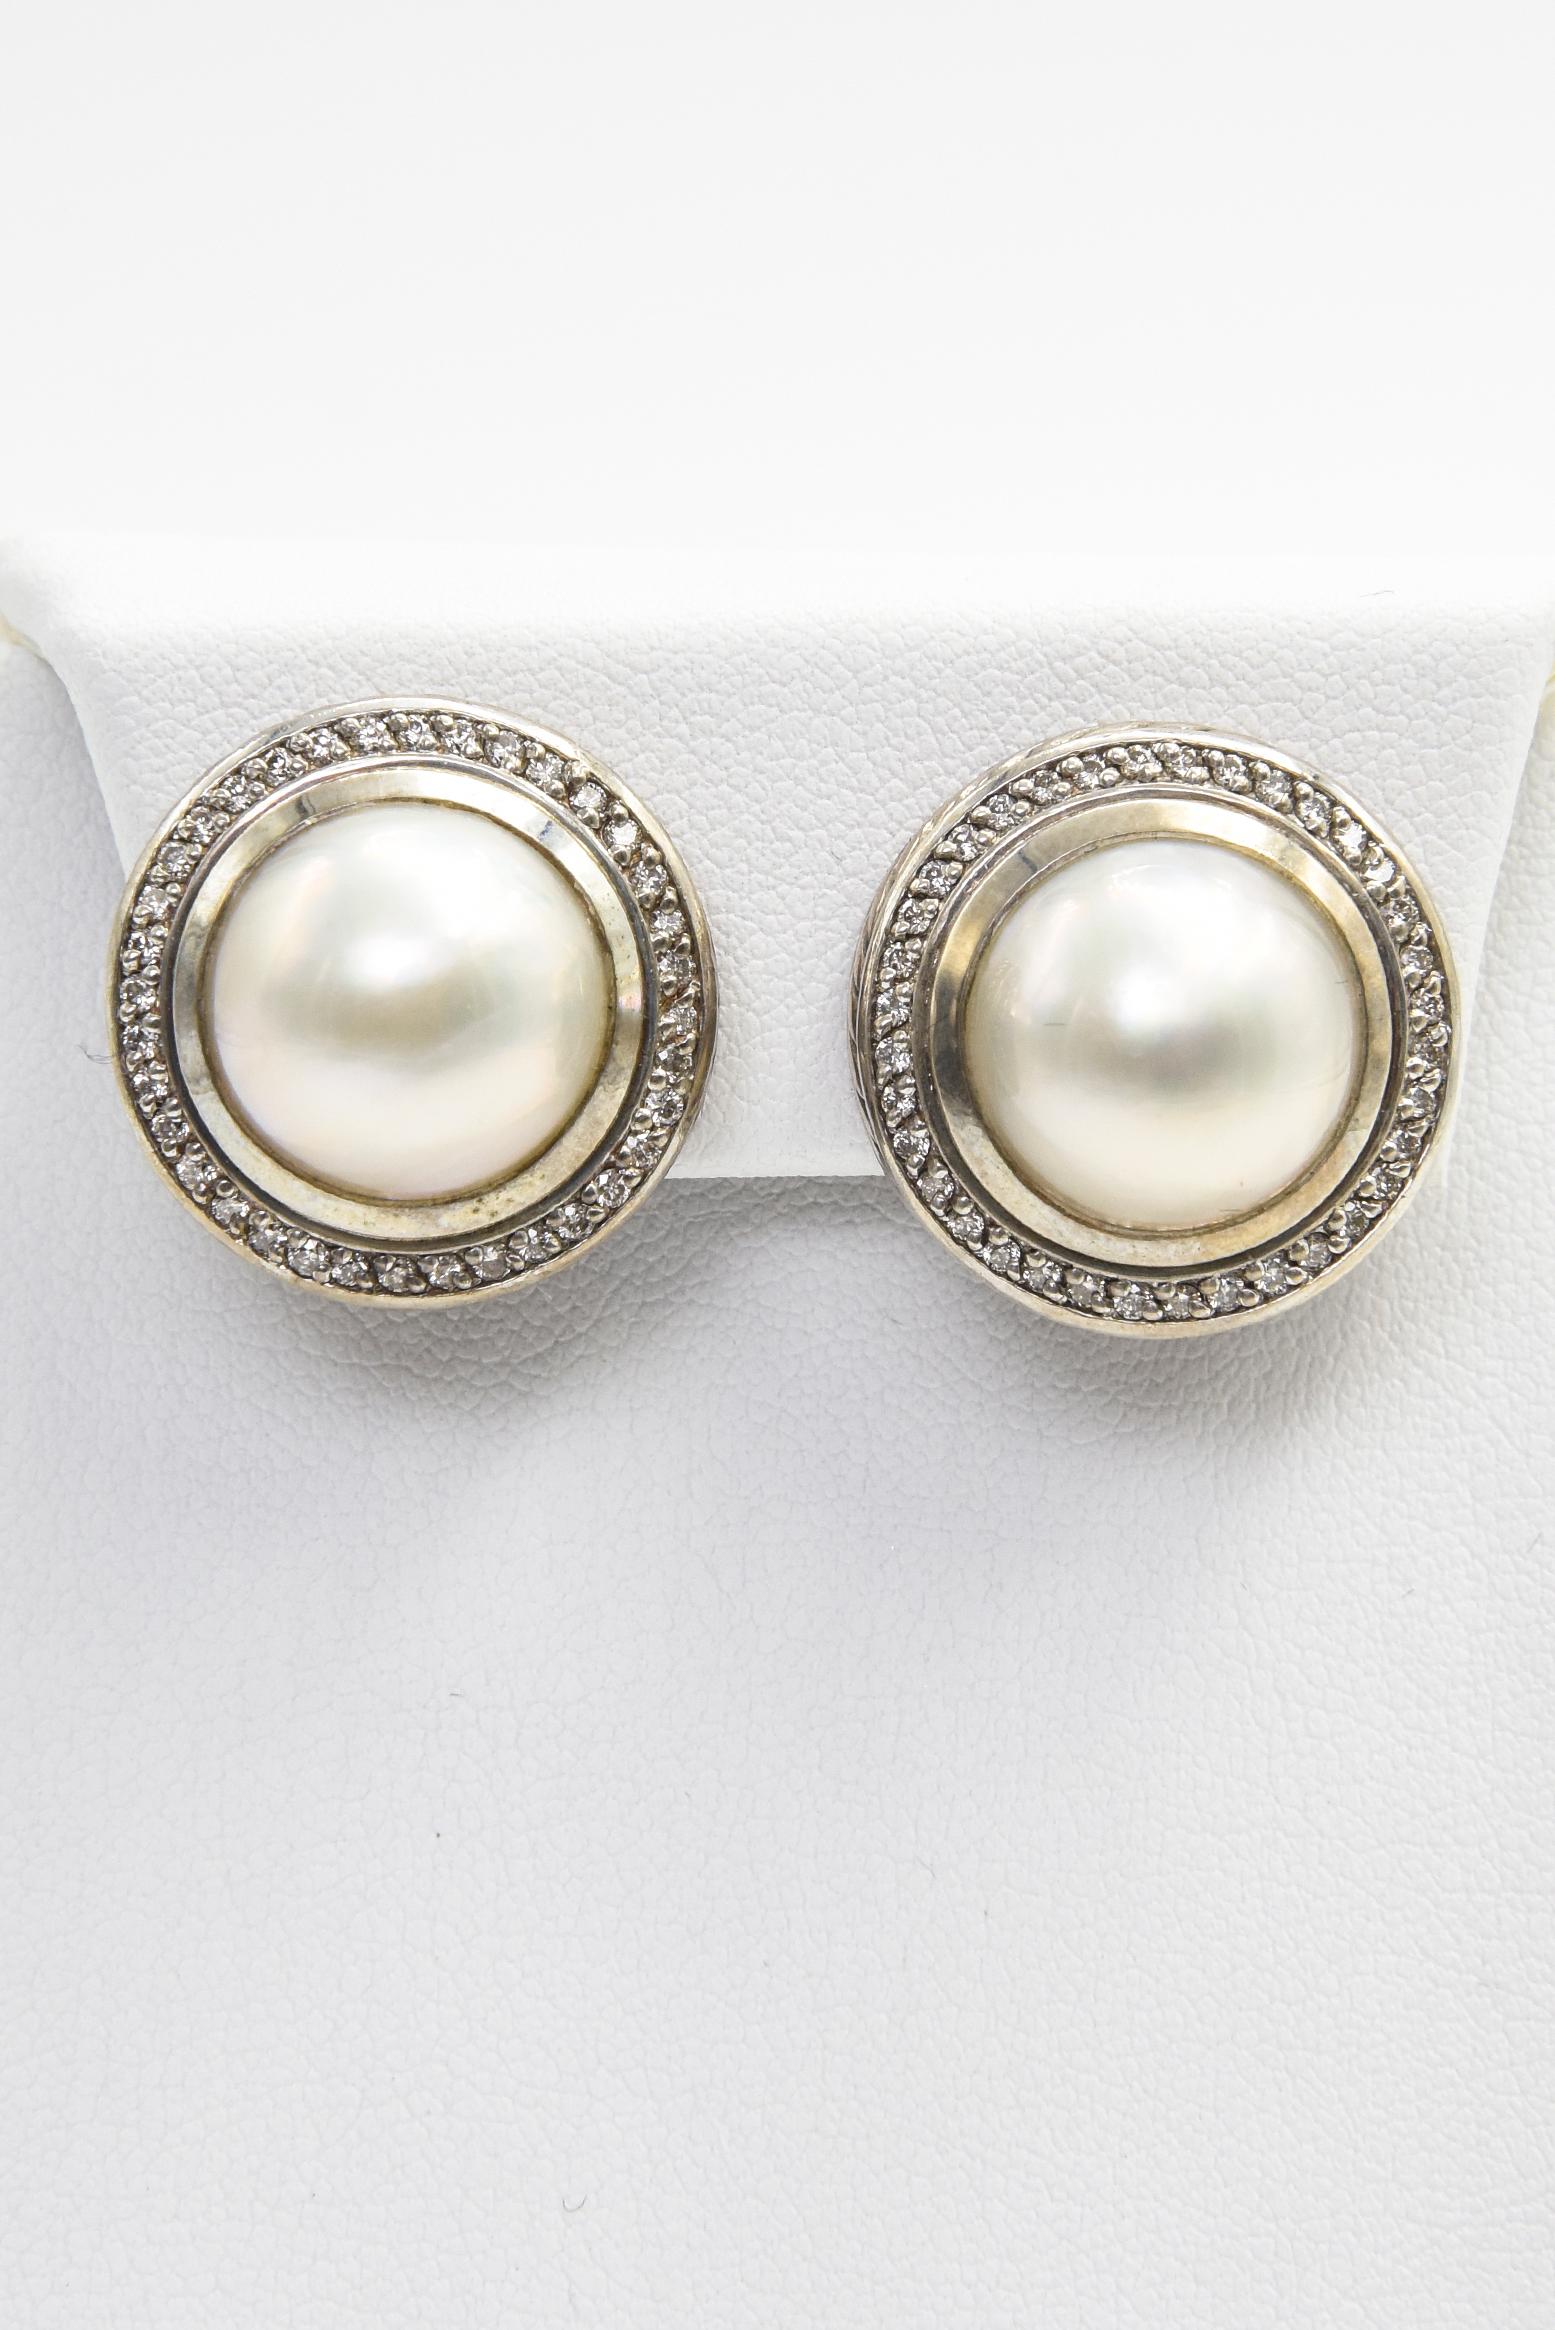 David Yurman sterling silver clip on earrings featuring a 14mm mabe pearl center in a diamond frame with a cable bezel outer rim.  They have approximately .72 carats in round cut diamond weight.  The back is a double omega clip on.  Marked DY 925 